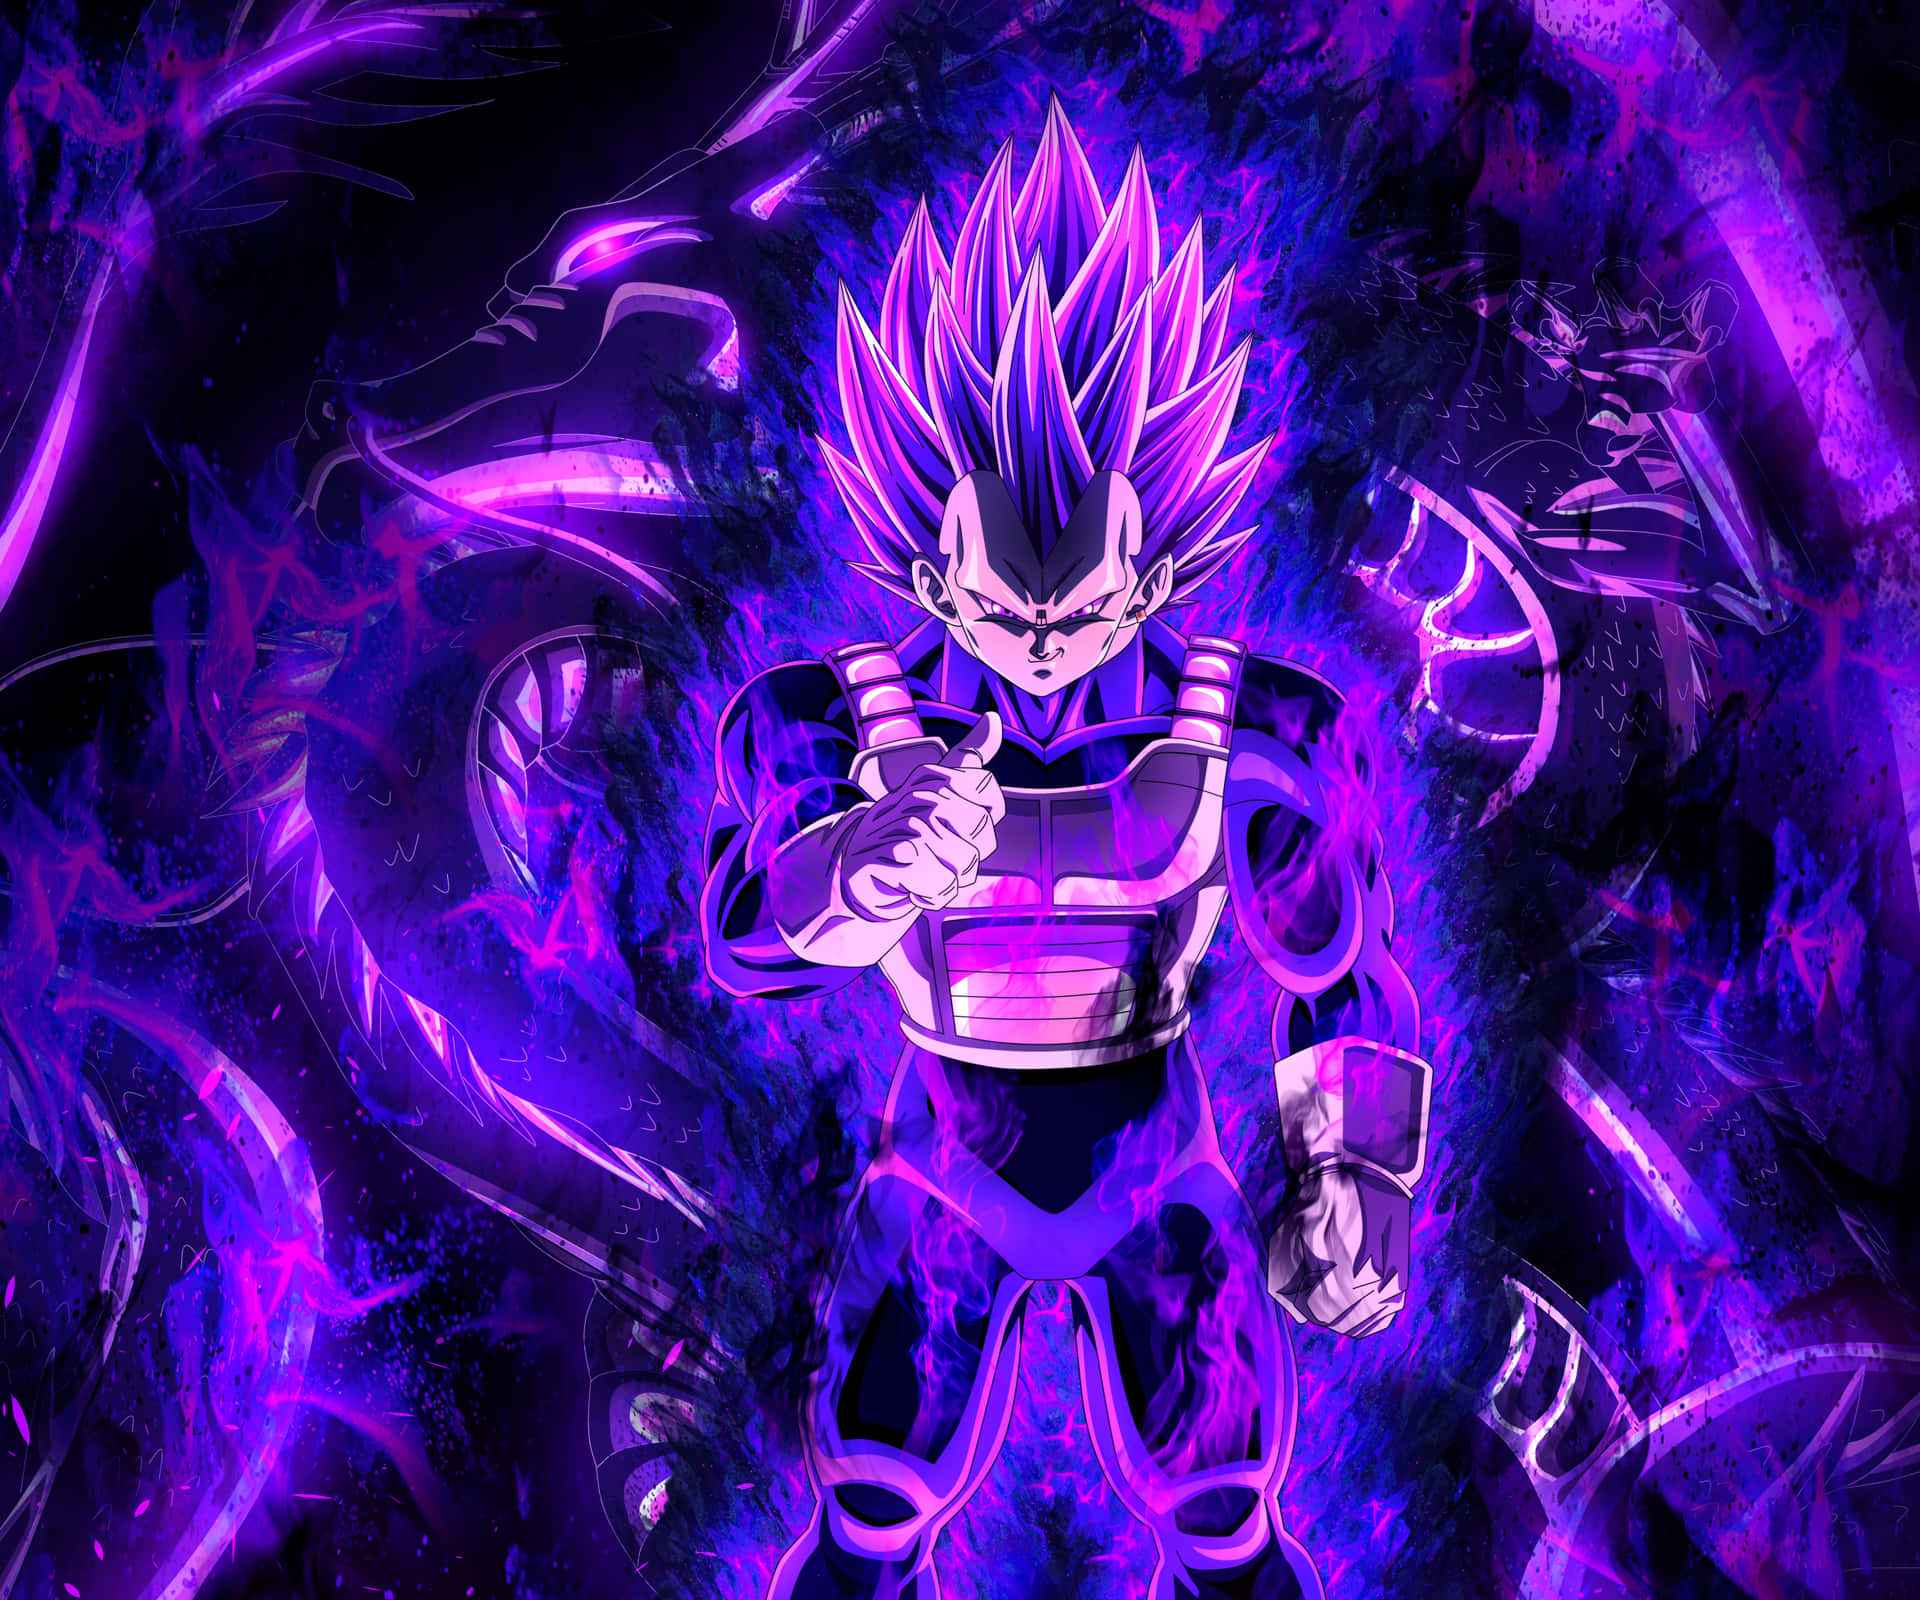 Cool Vegeta from Dragon Ball Z is Ready to Take on Any Opponent! Wallpaper